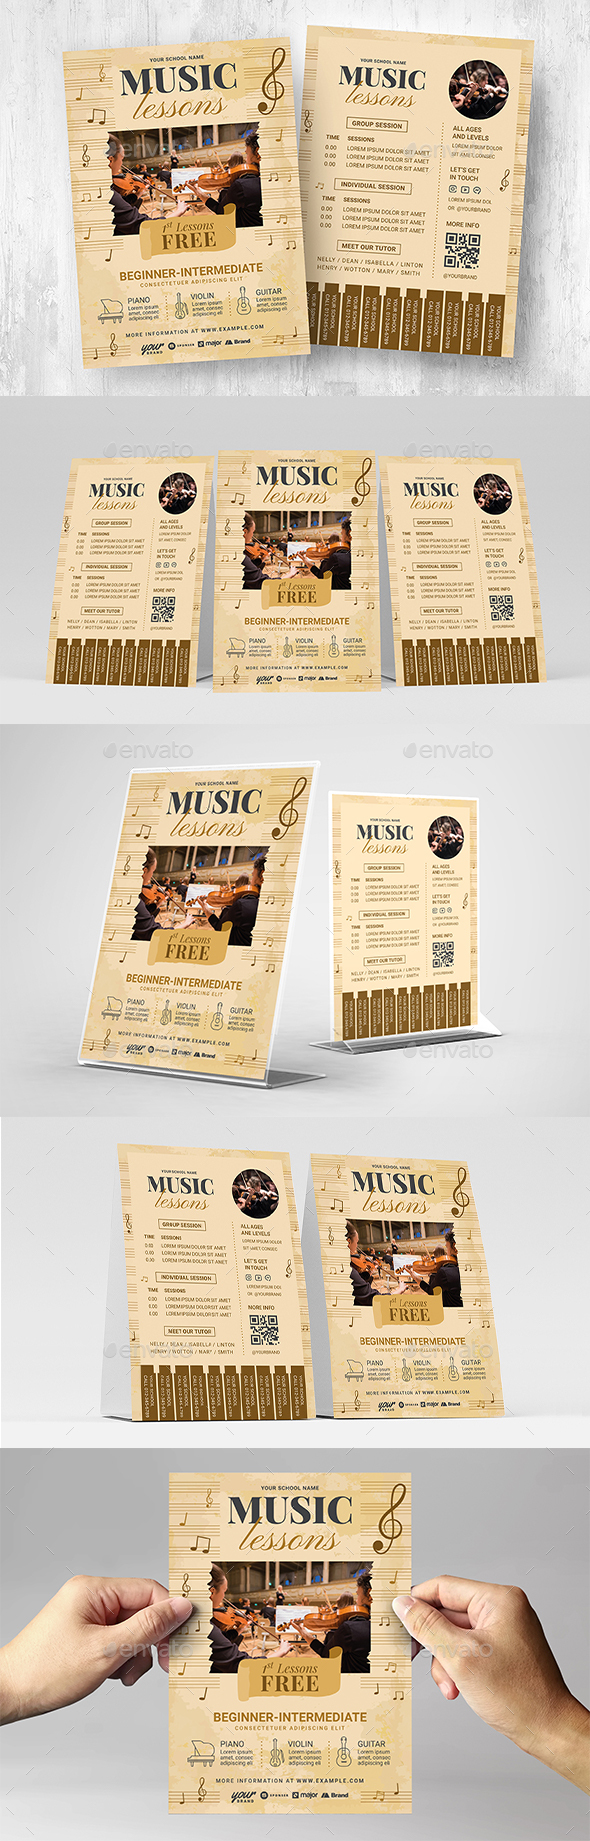 Music Lessons Flyer